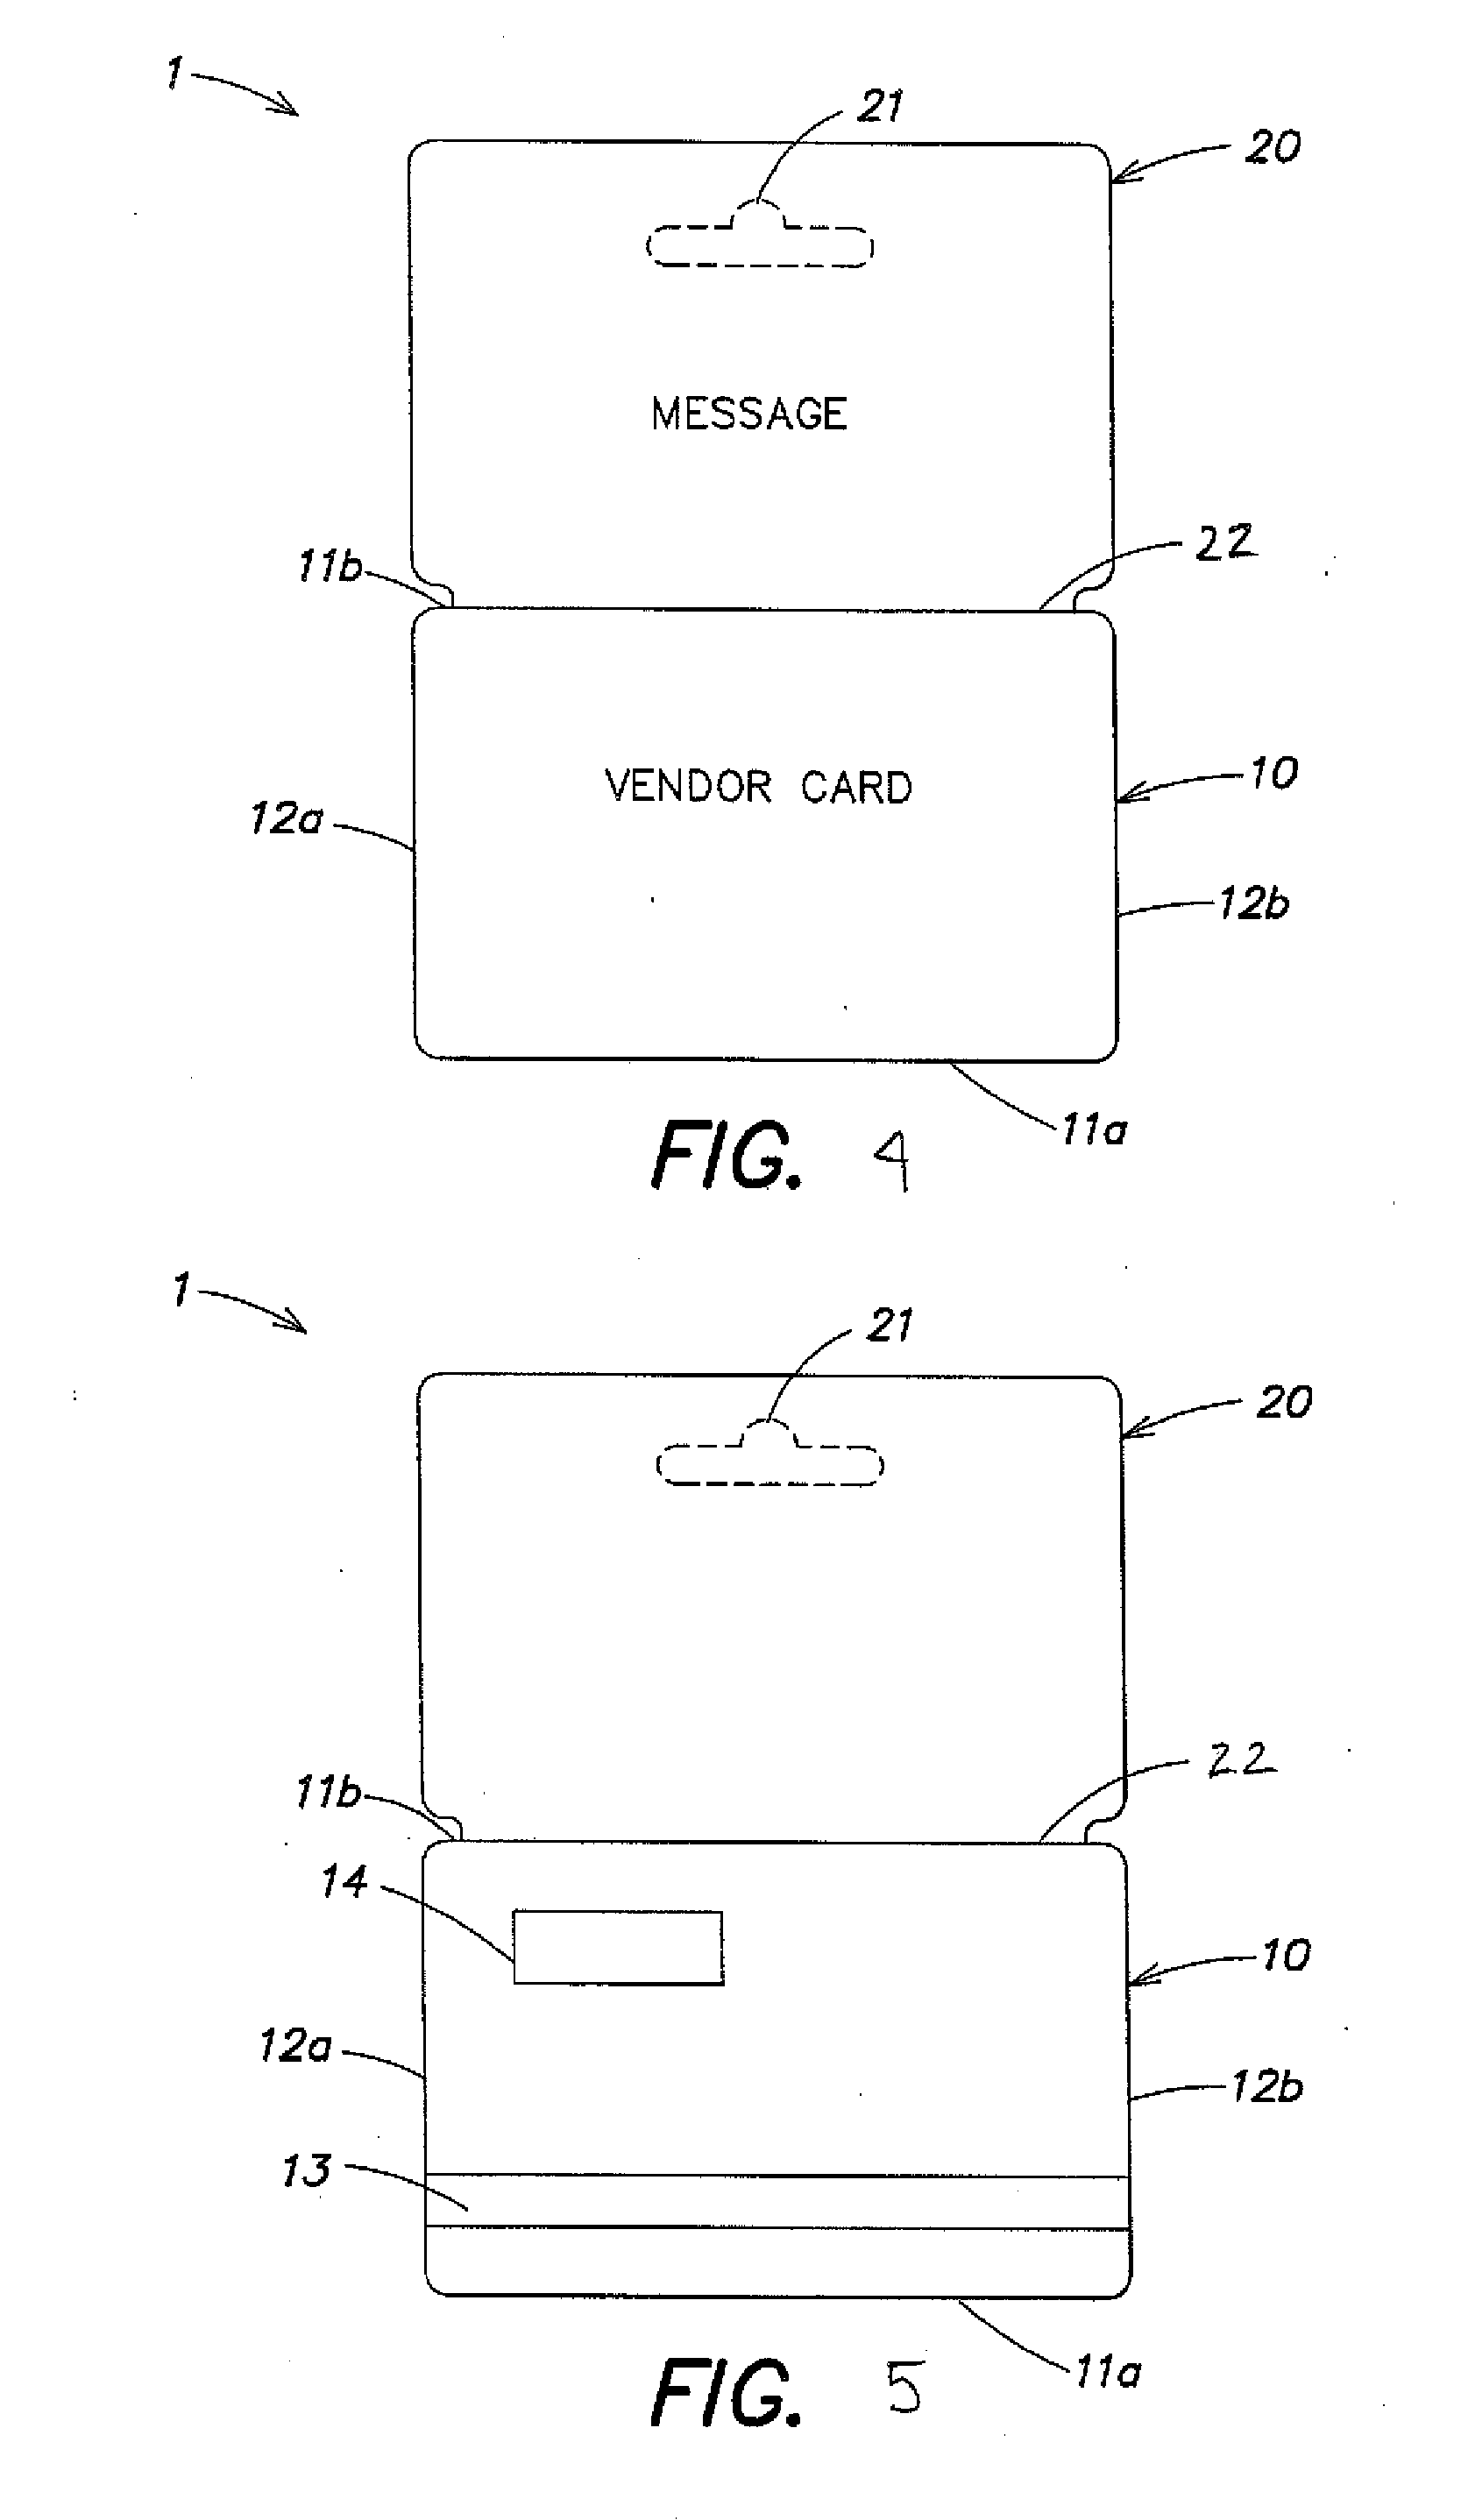 Transaction card assembly and methods of manufacture